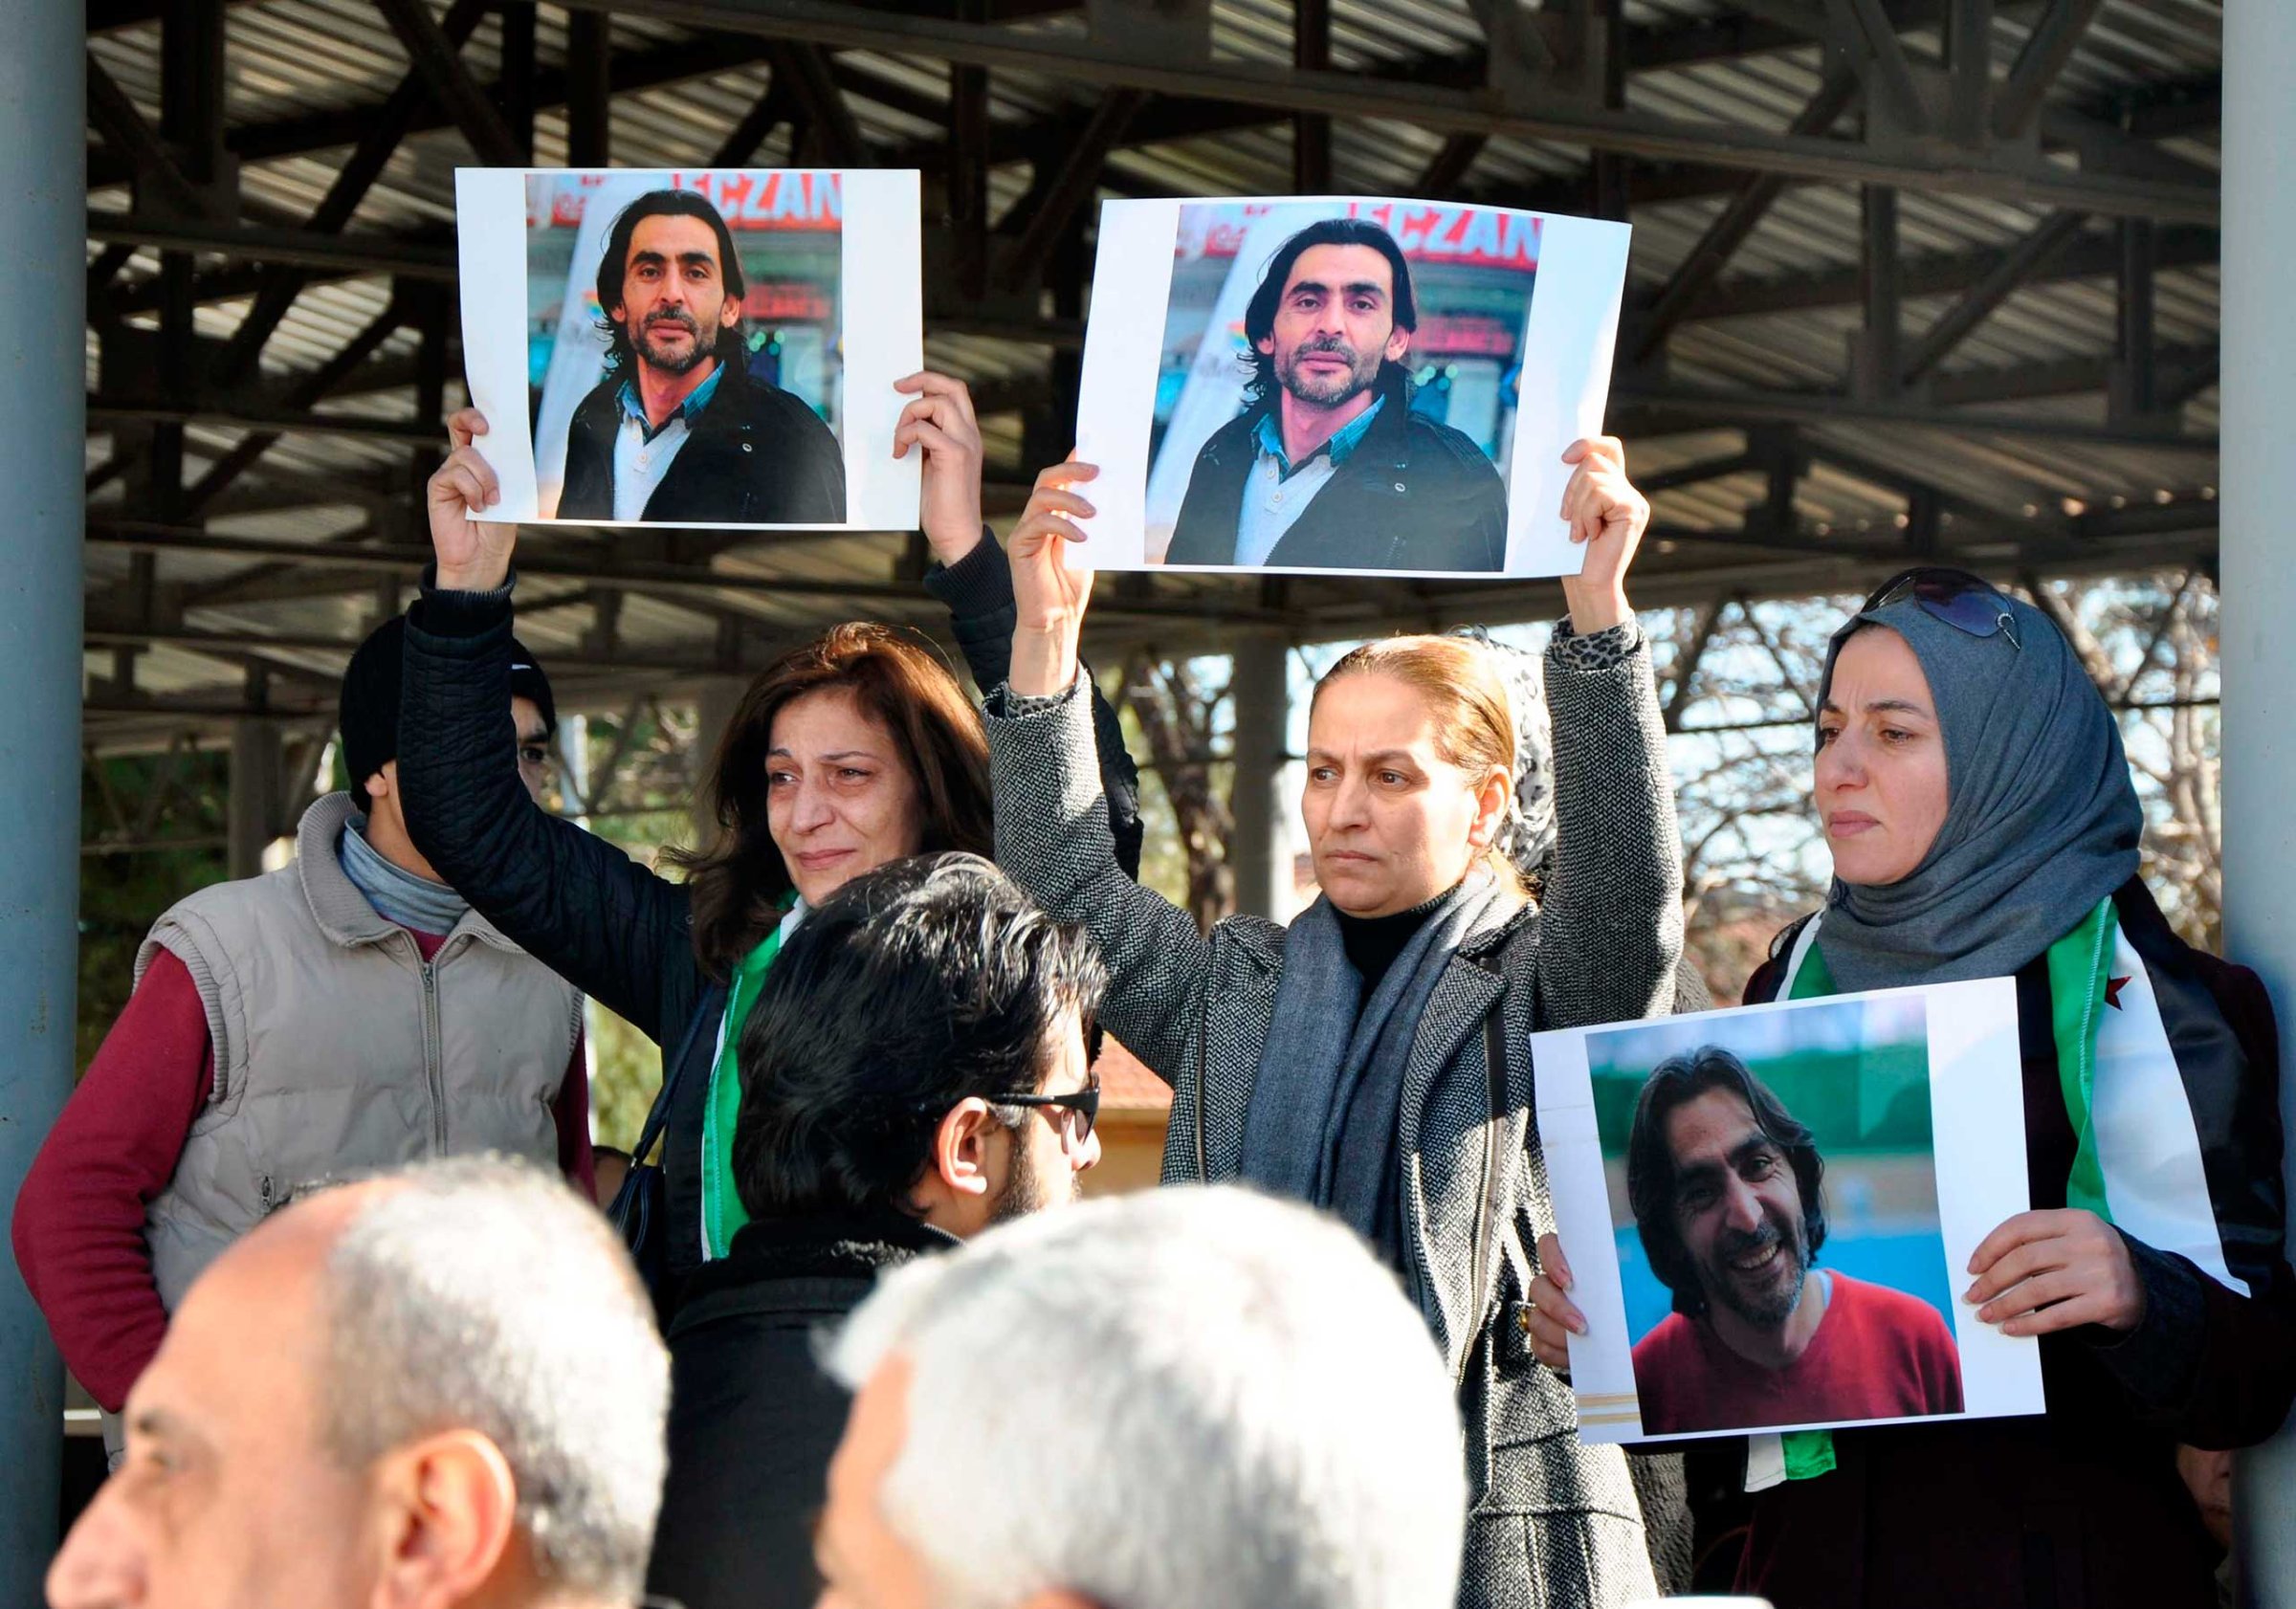 Women hold pictures of film maker Naji Jerf, a citizen journalist with the anti-ISIS activist group Raqqa is Being Slaughtered Silently, who was killed Dec. 27 in Gaziantep, Turkey, on Dec. 28, 2015.